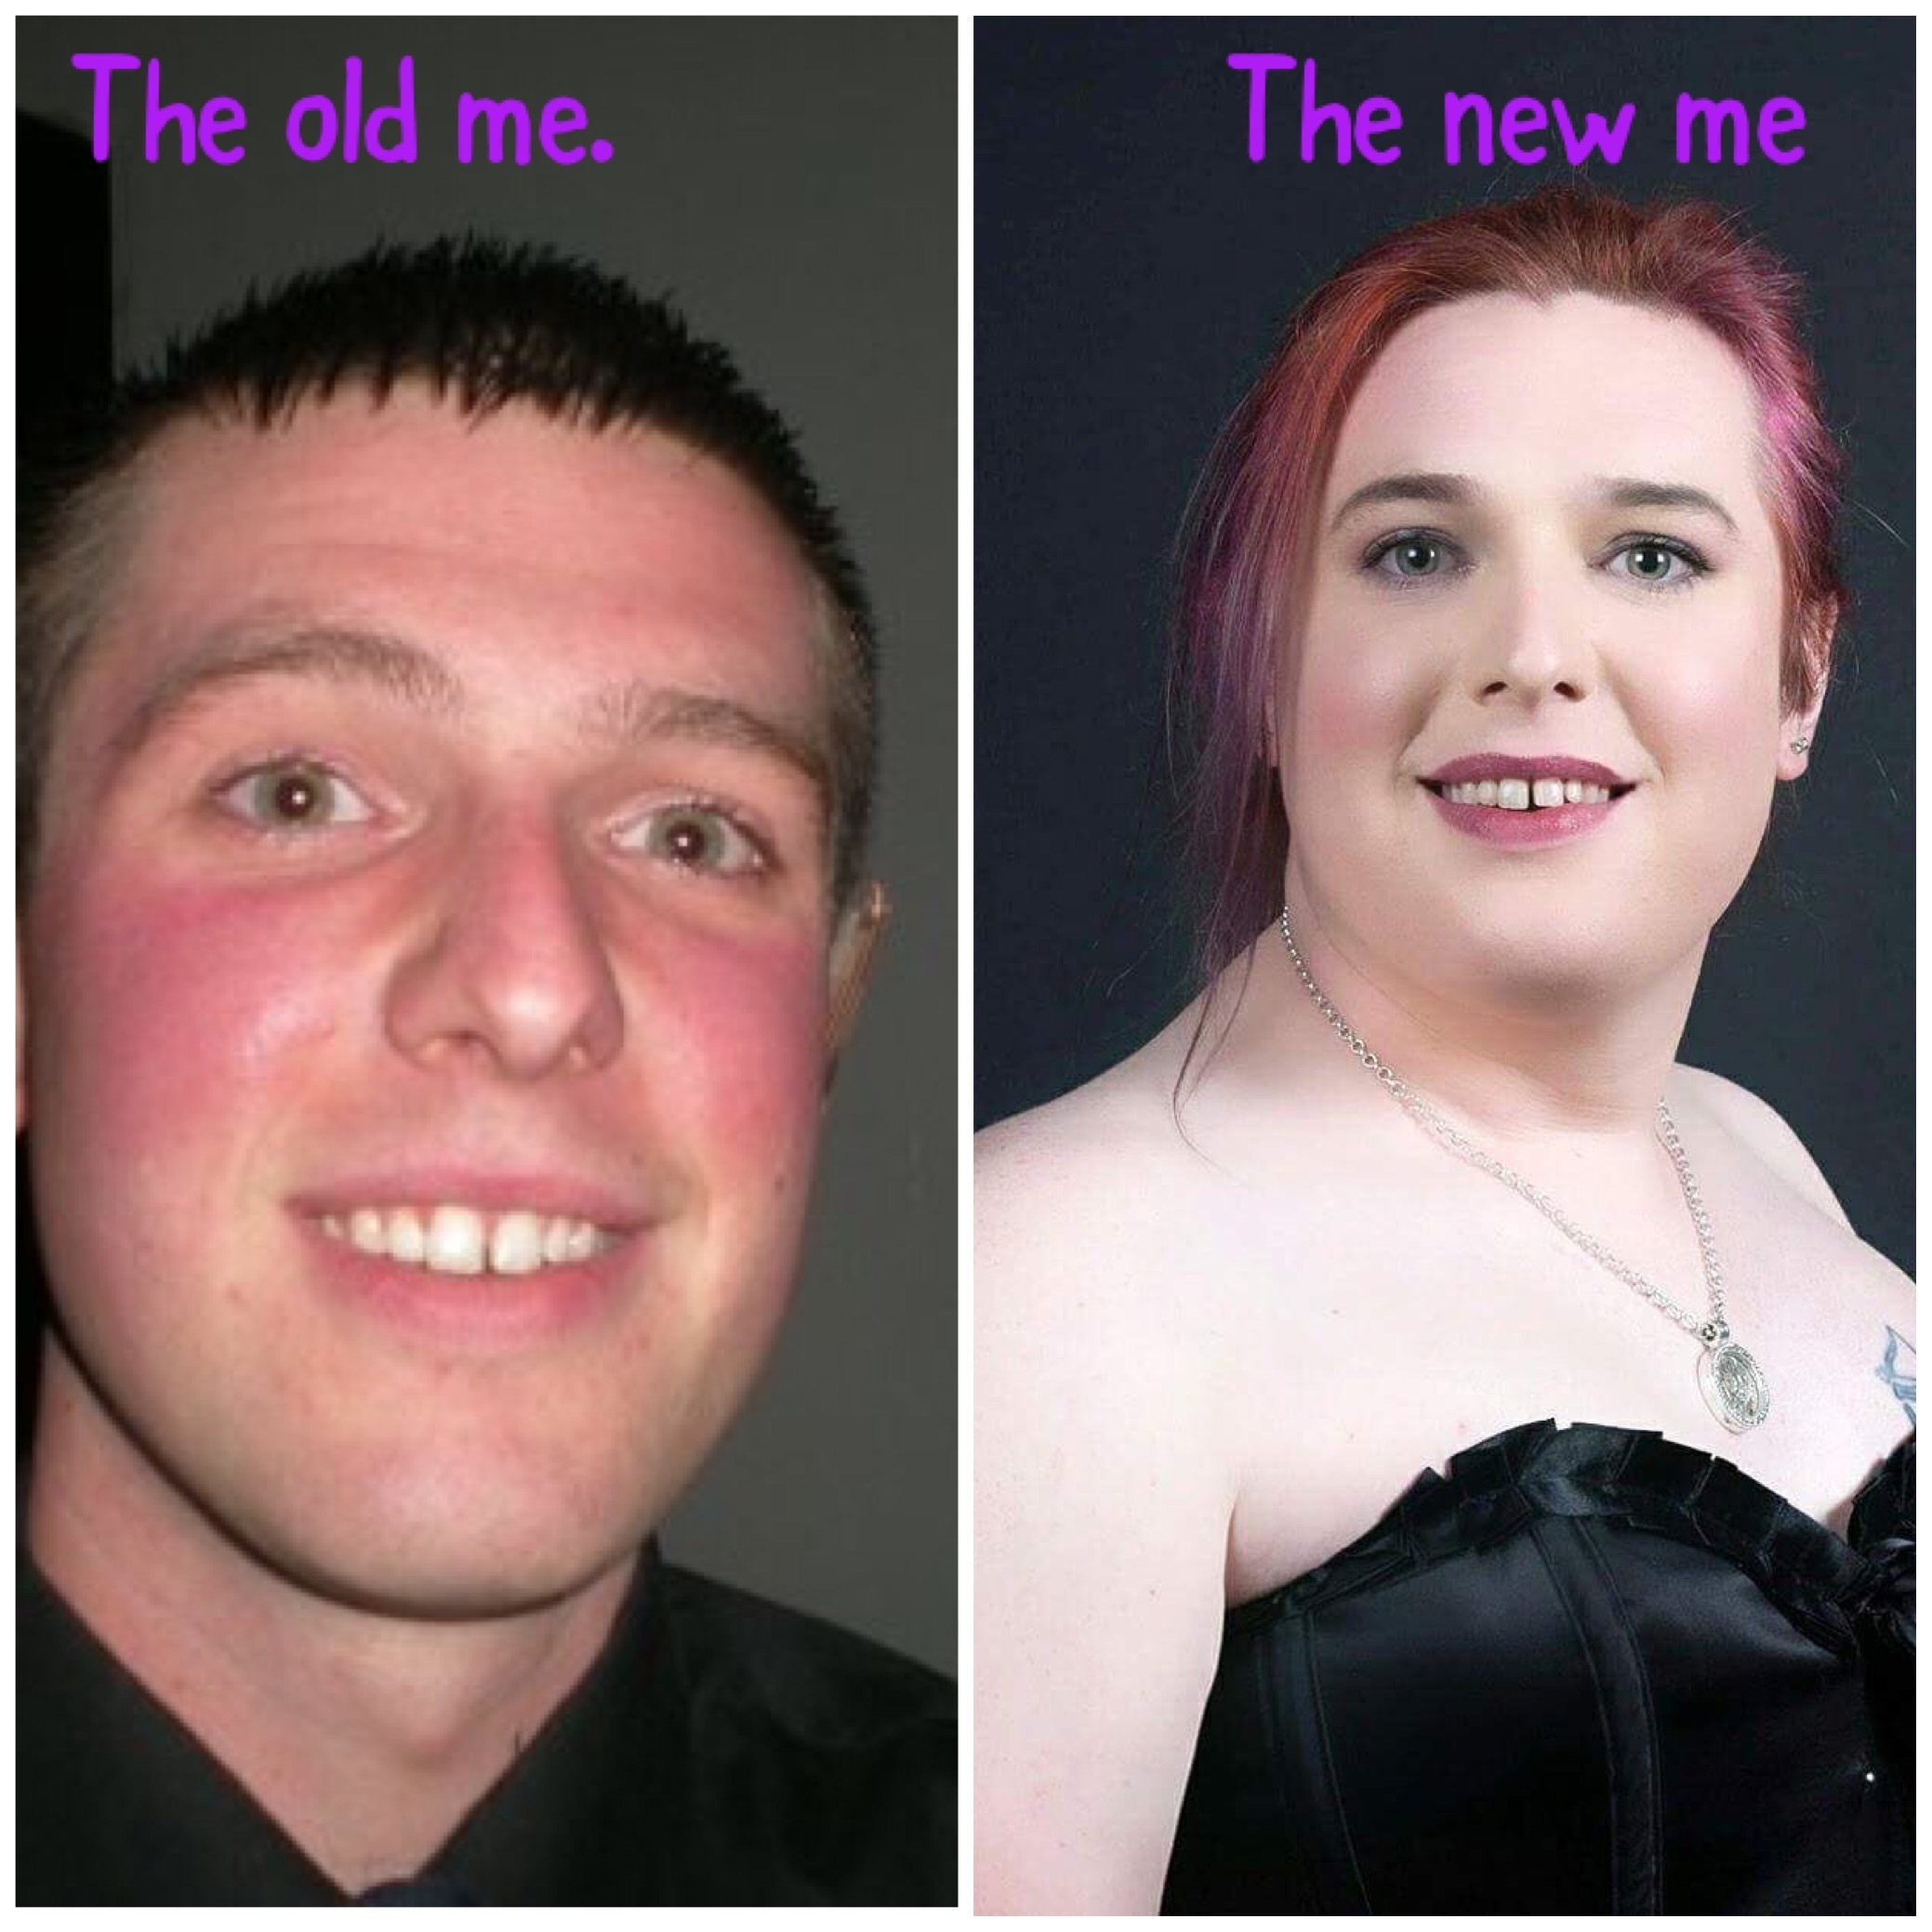 the old me as a male to the new me